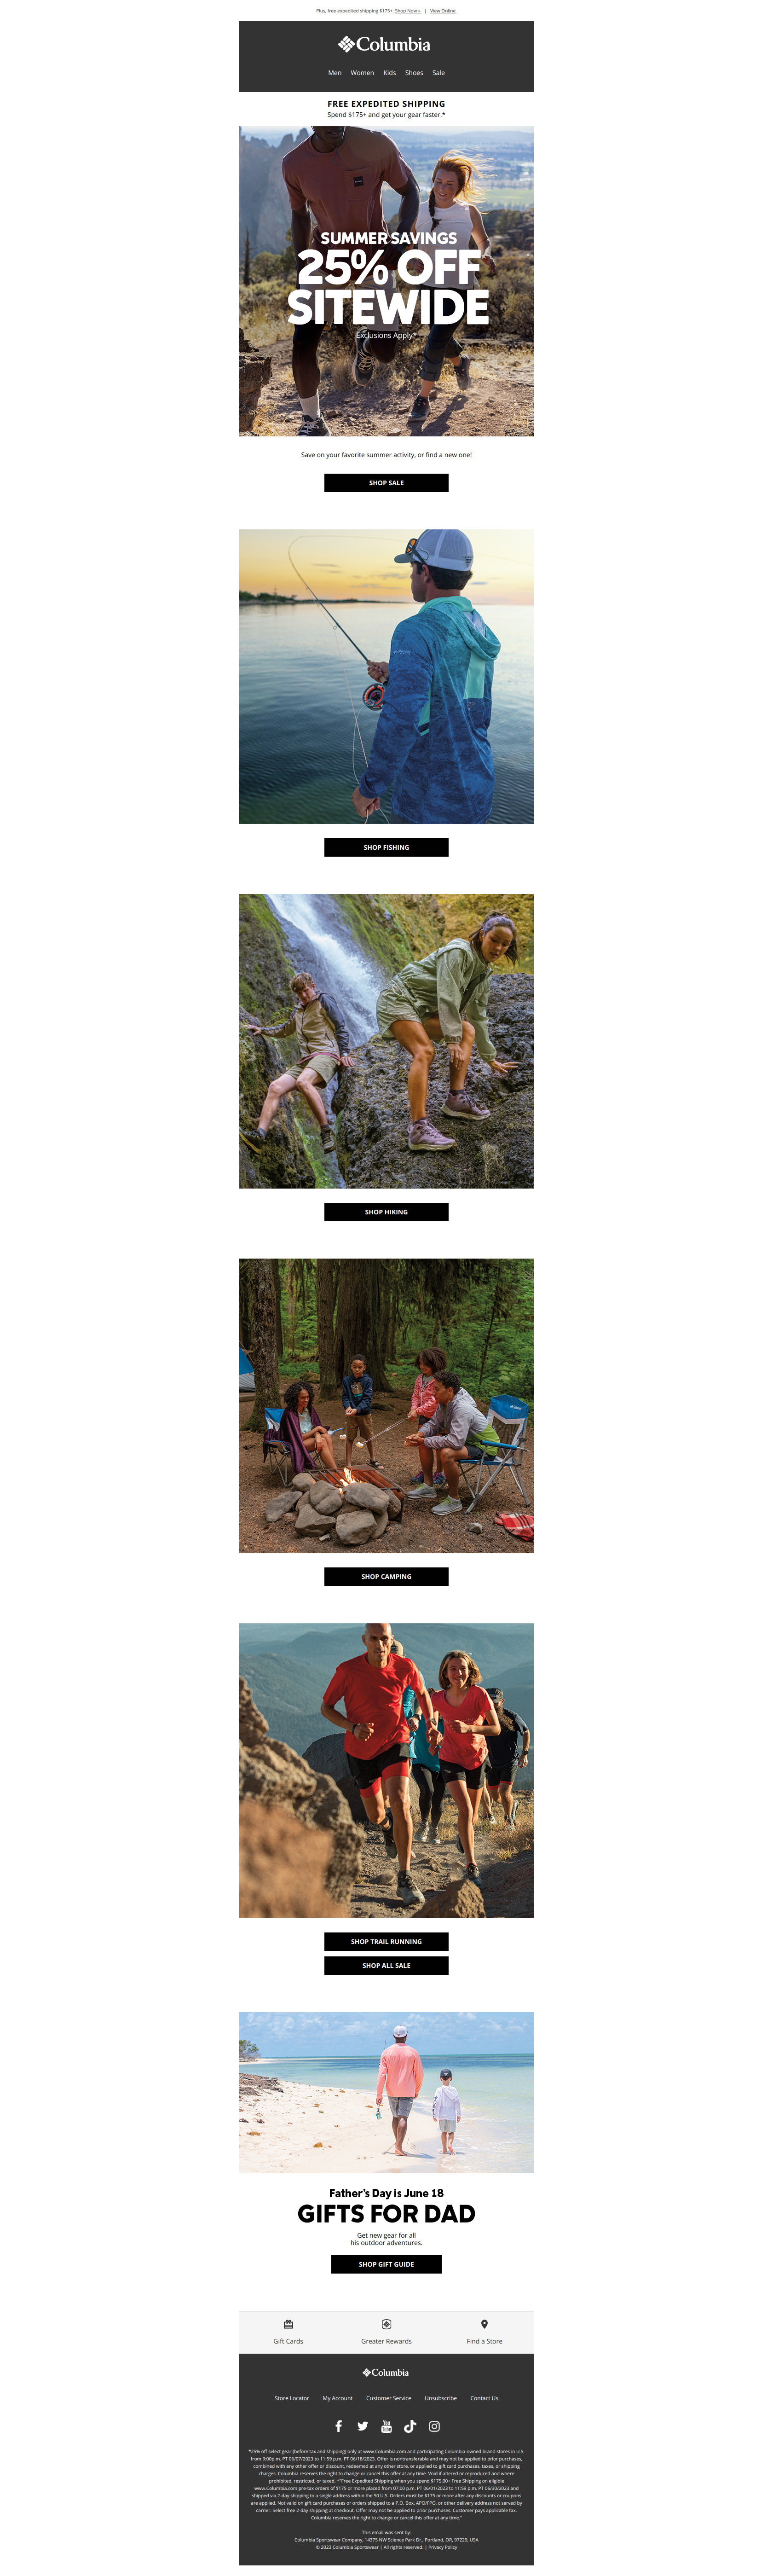 Get 25% off hiking, fishing, camping gear, & more! - Columbia Sportswear Newsletter